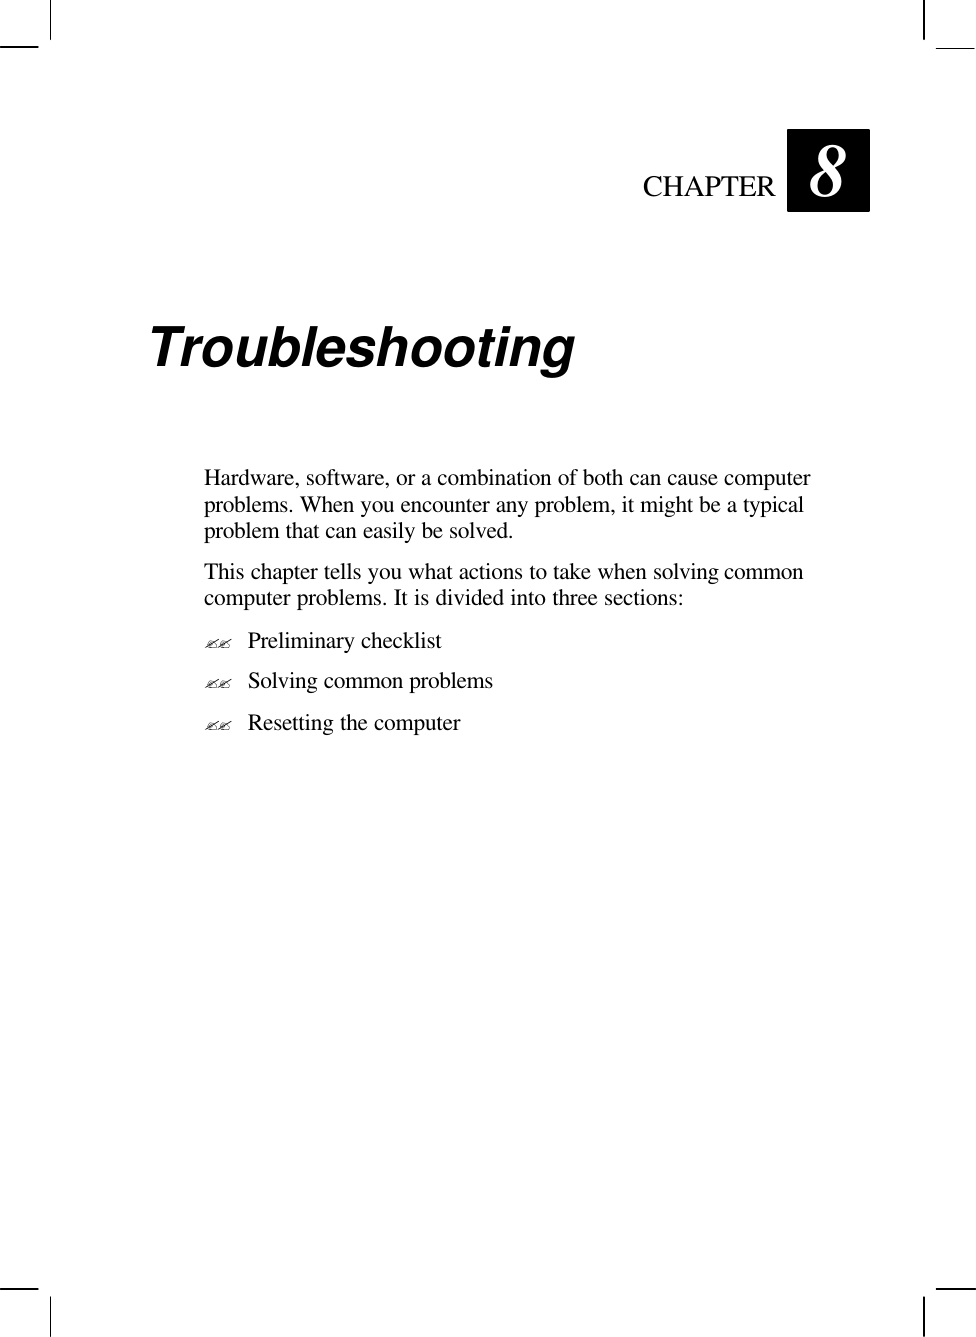   CHAPTER 8 Troubleshooting Hardware, software, or a combination of both can cause computer problems. When you encounter any problem, it might be a typical problem that can easily be solved. This chapter tells you what actions to take when solving common computer problems. It is divided into three sections: ?? Preliminary checklist ?? Solving common problems ?? Resetting the computer 